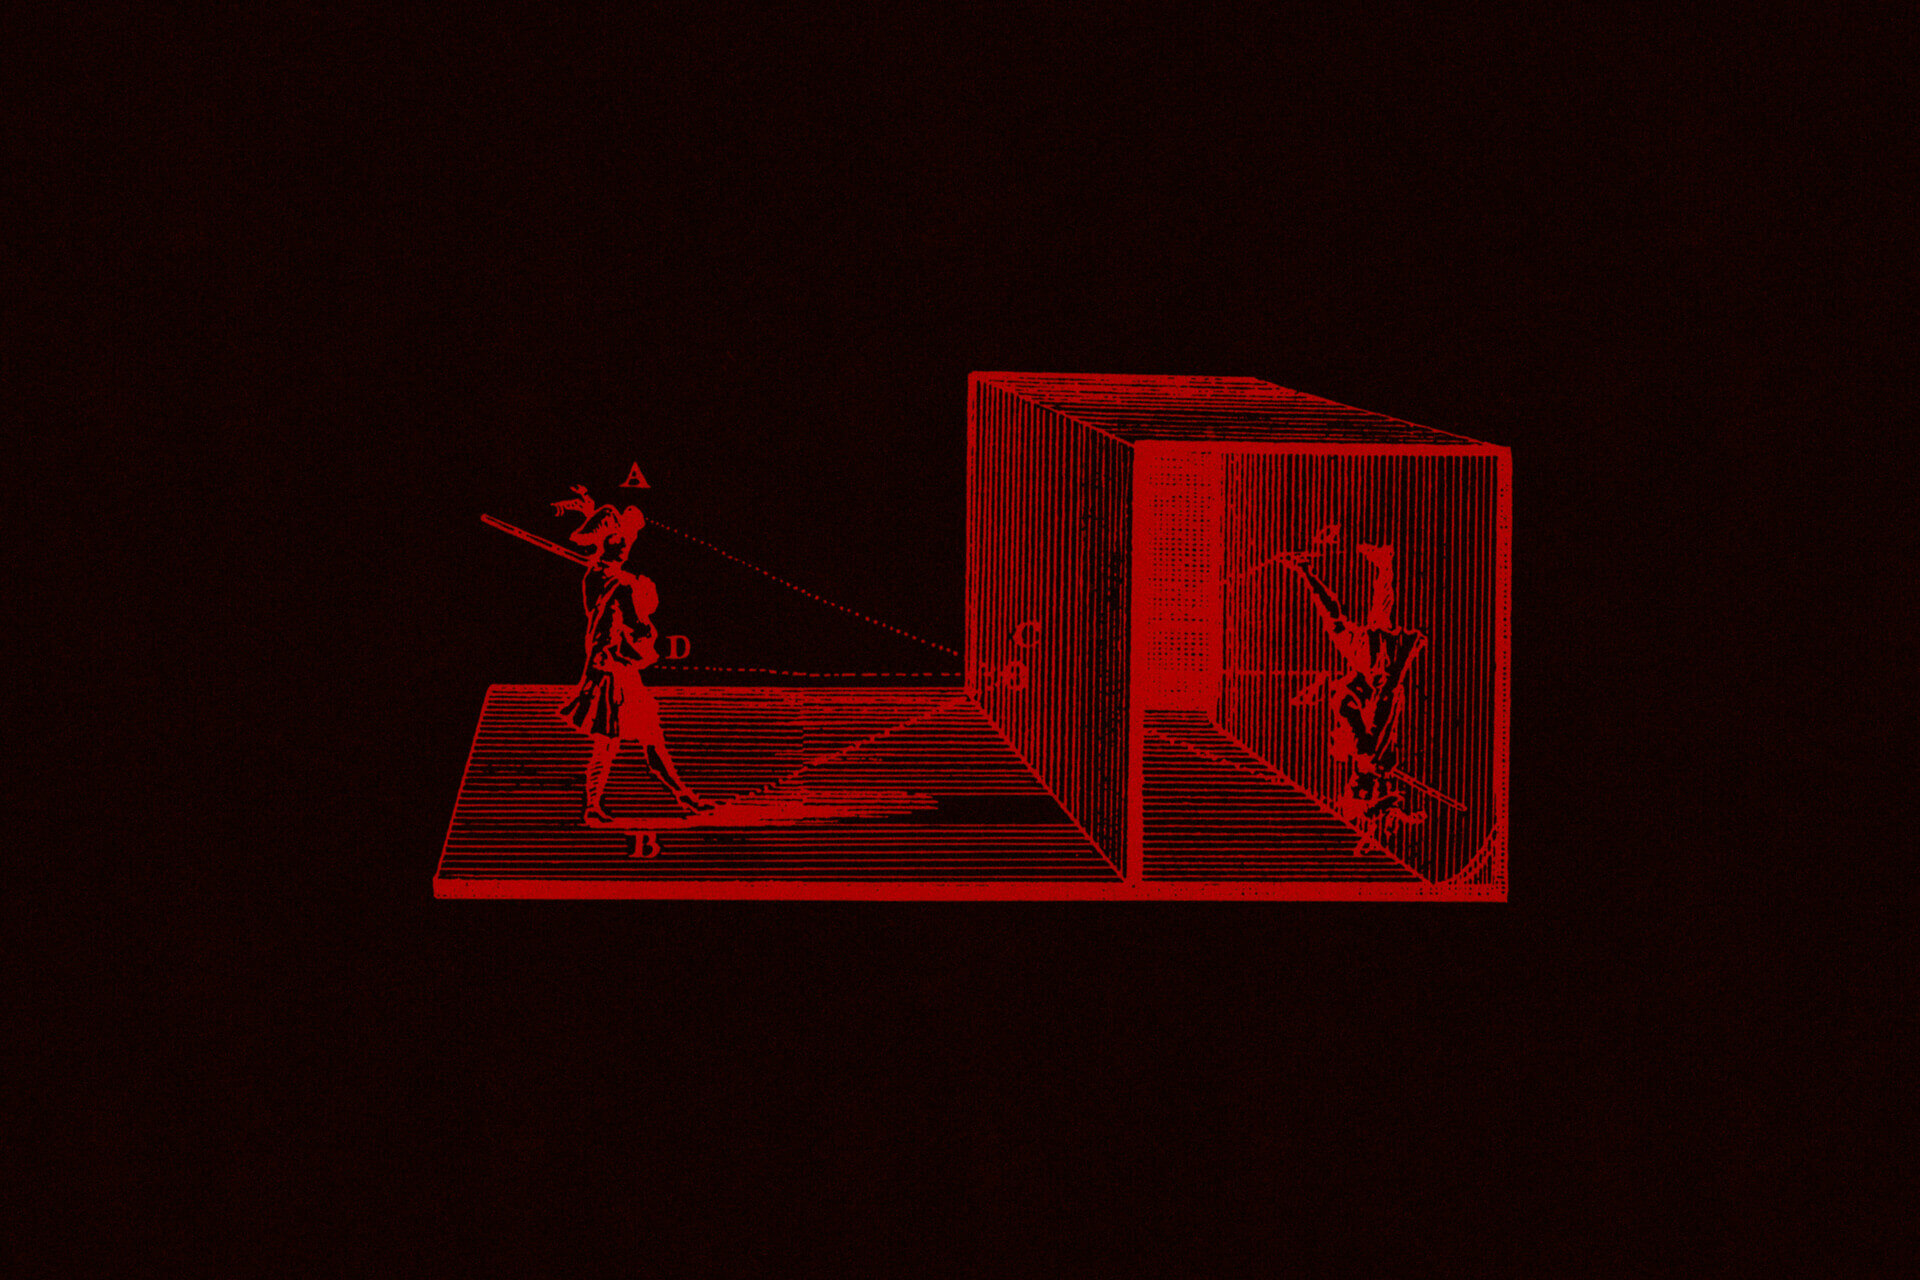 Illustration of the camera oscura principle red on dark in A4 landscape format